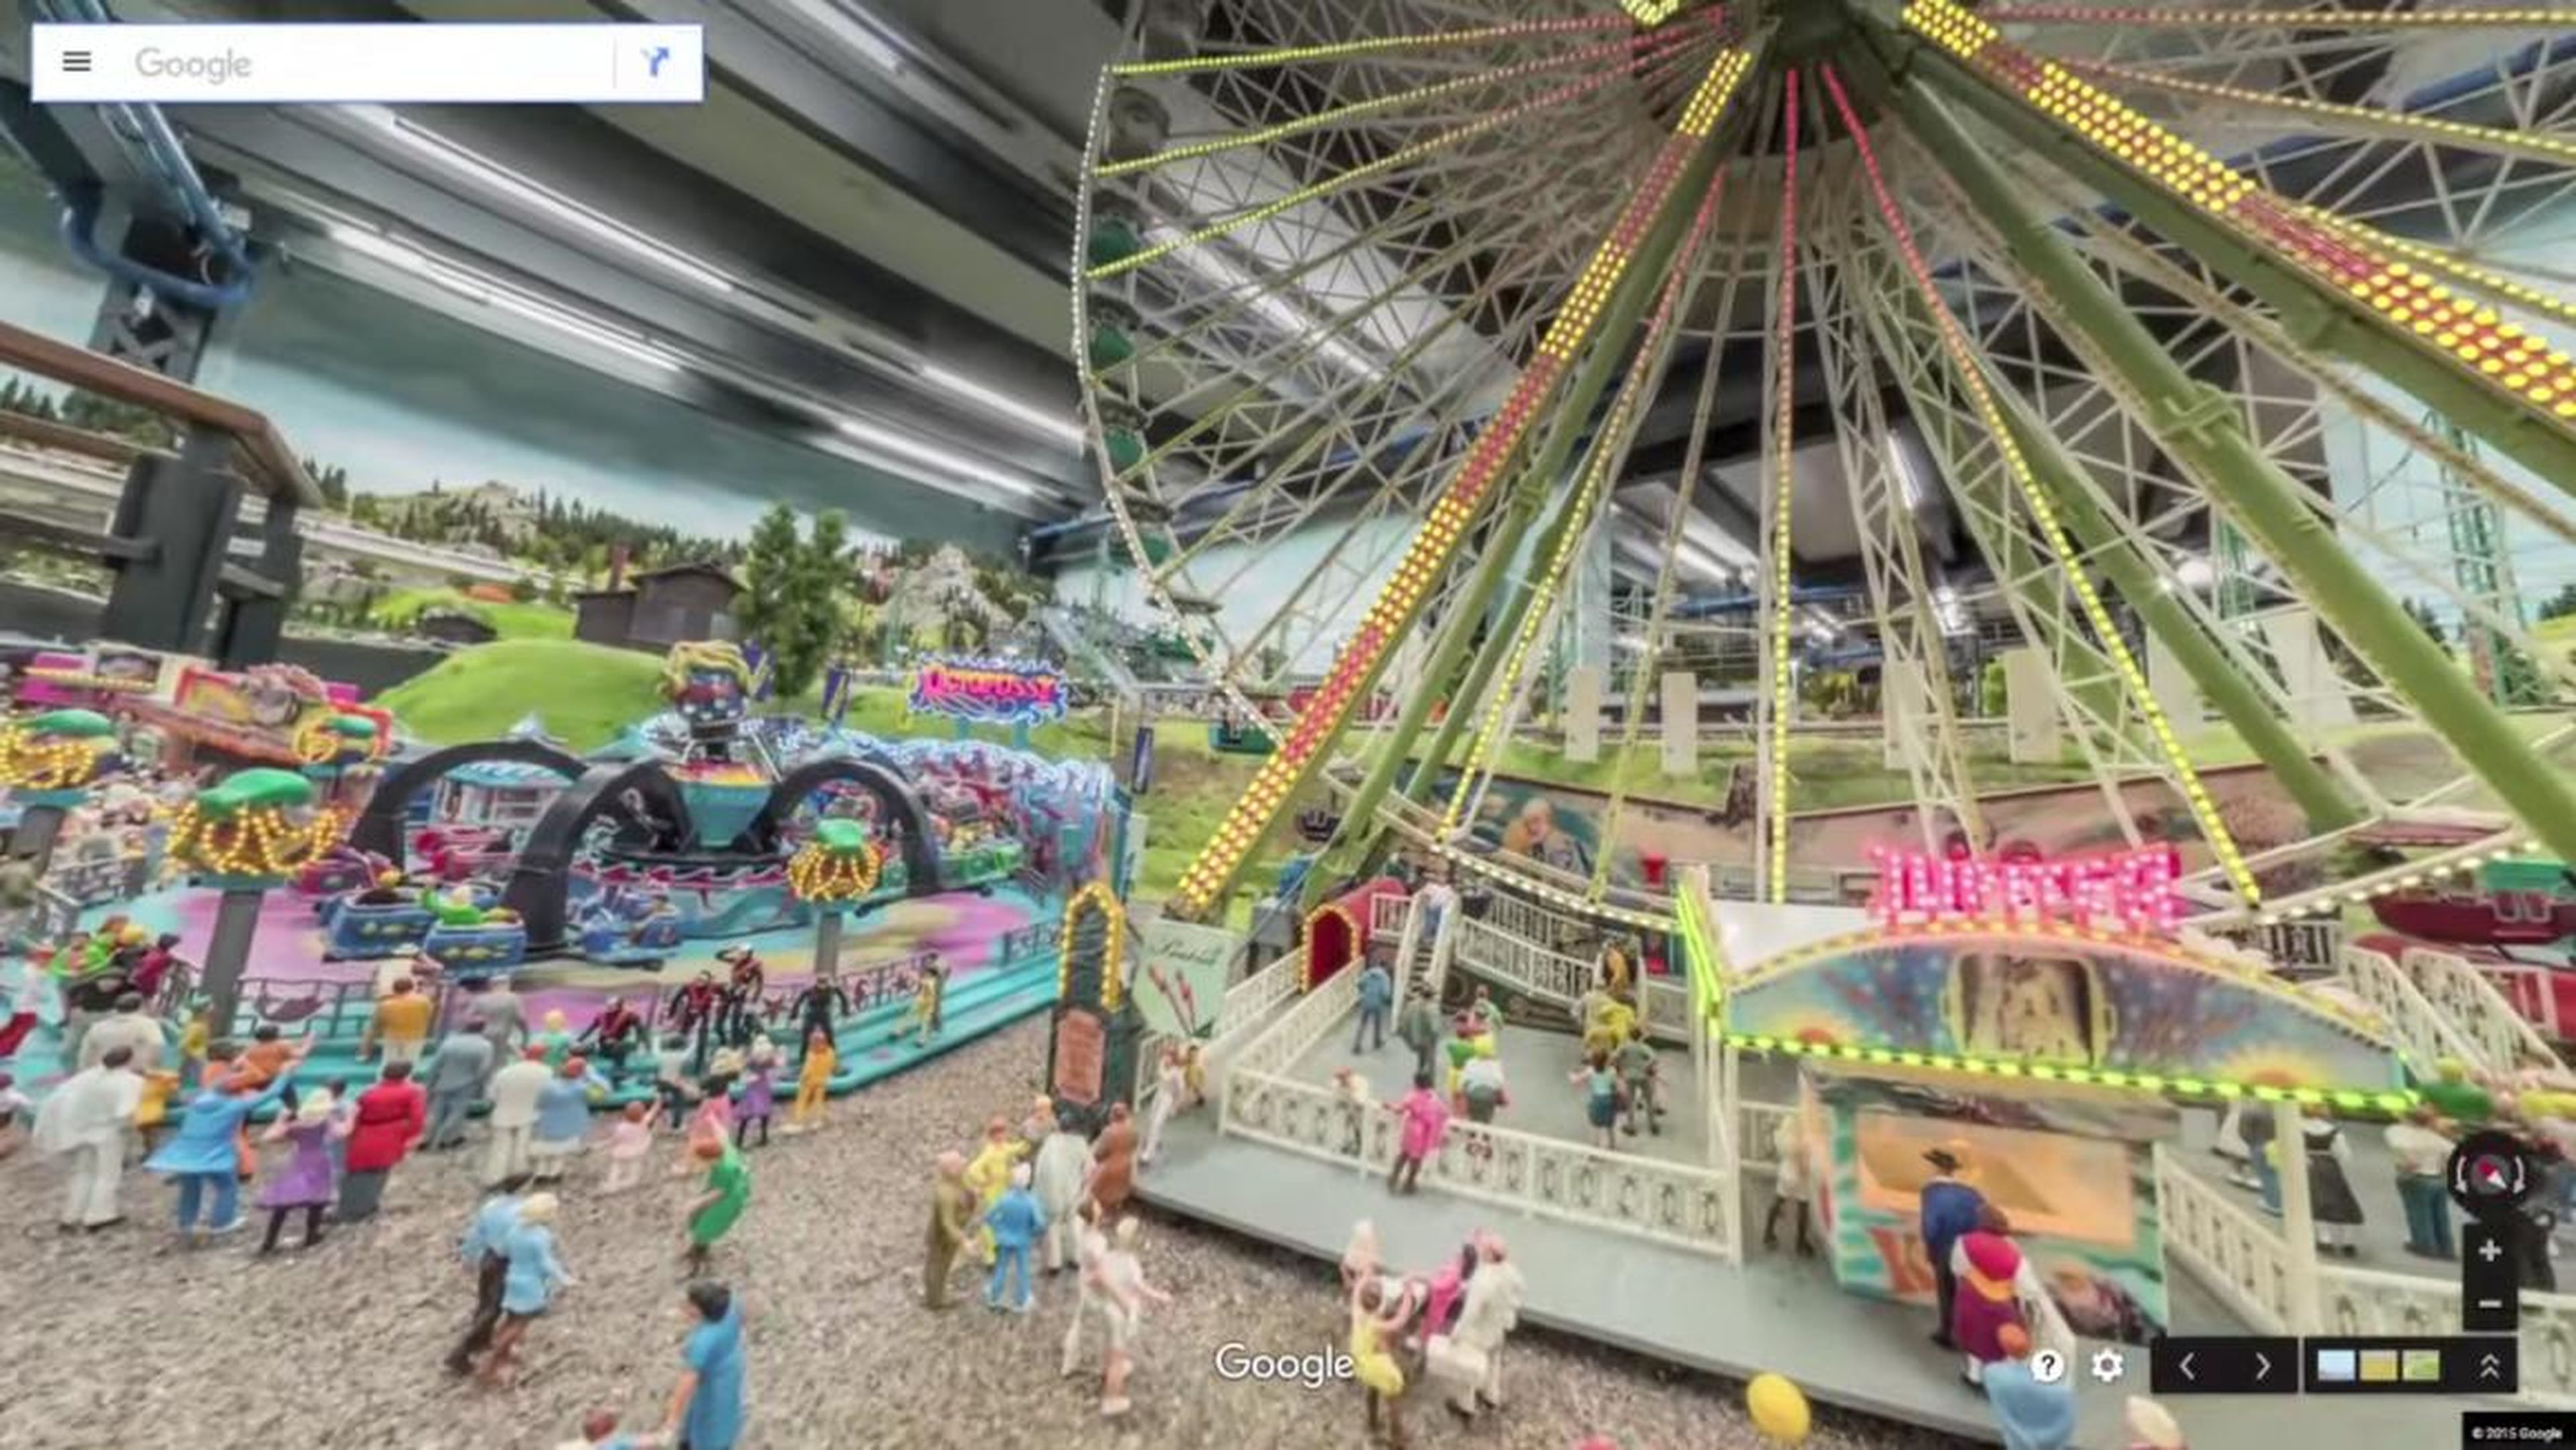 Here's the view of the fair from Google's mini Street View car.